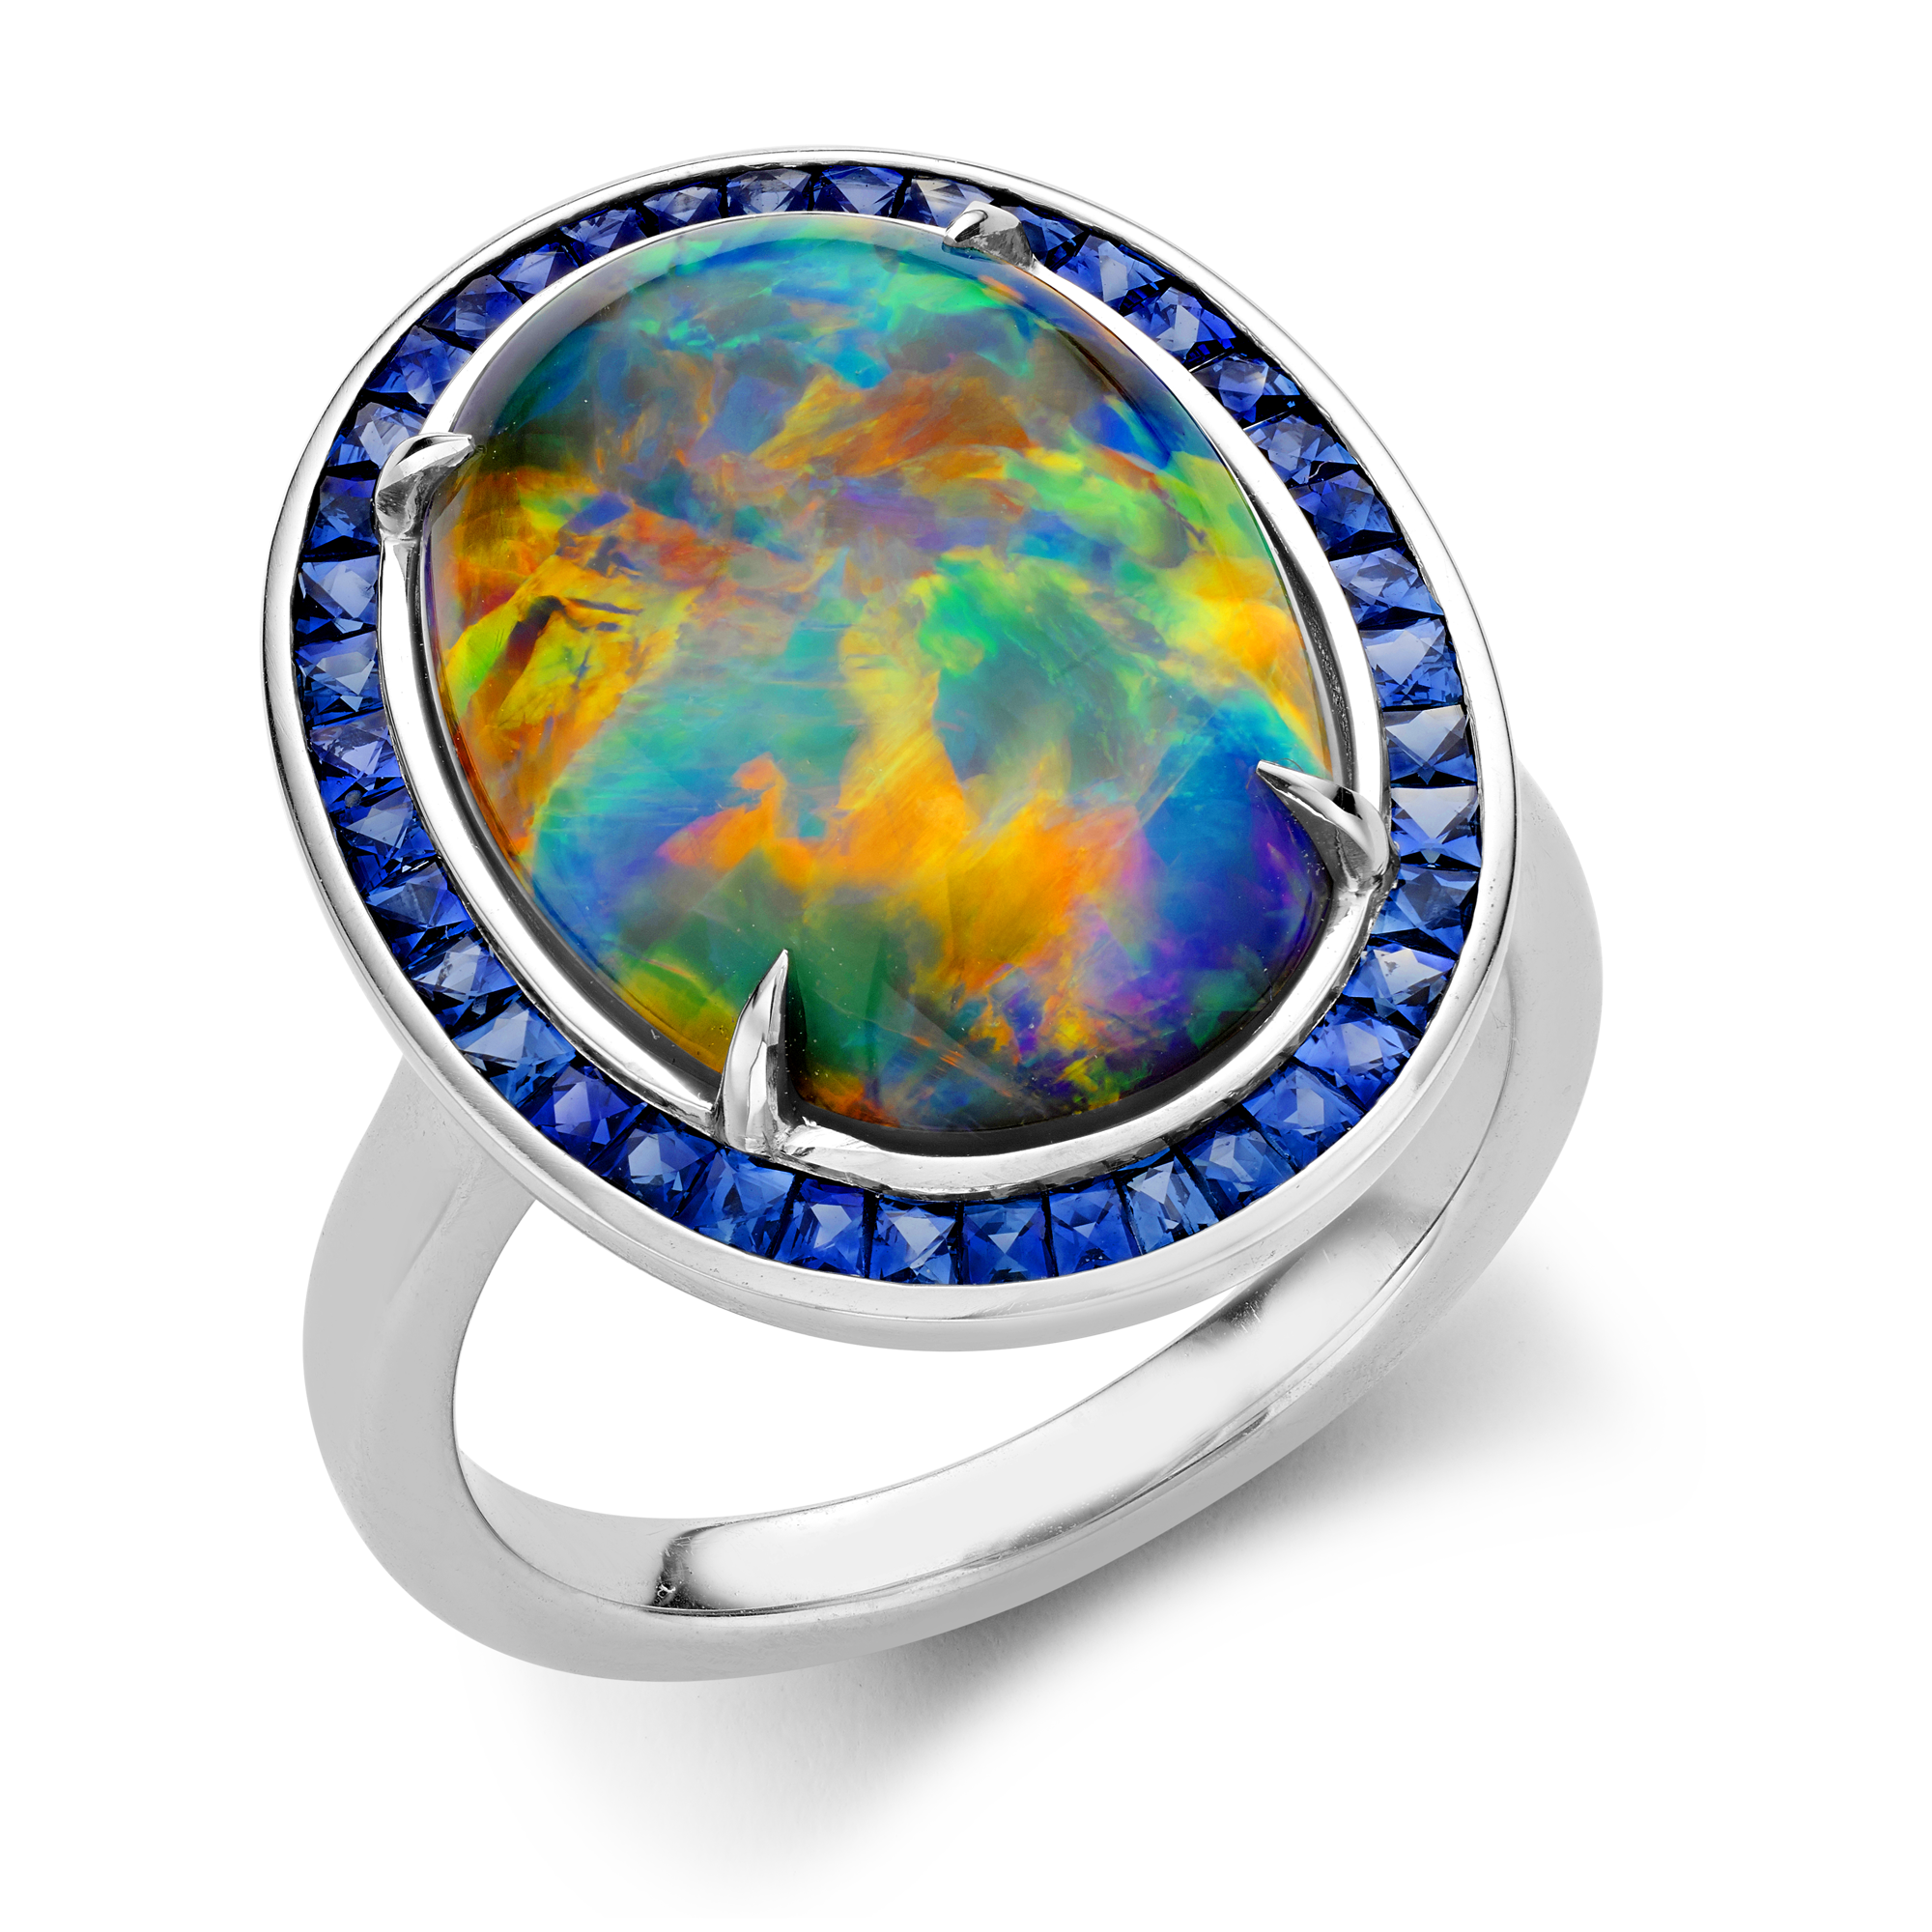 Masterpiece Black Opal Ring with Sapphire Surround Cabochon Cut, Four Claw Set_1